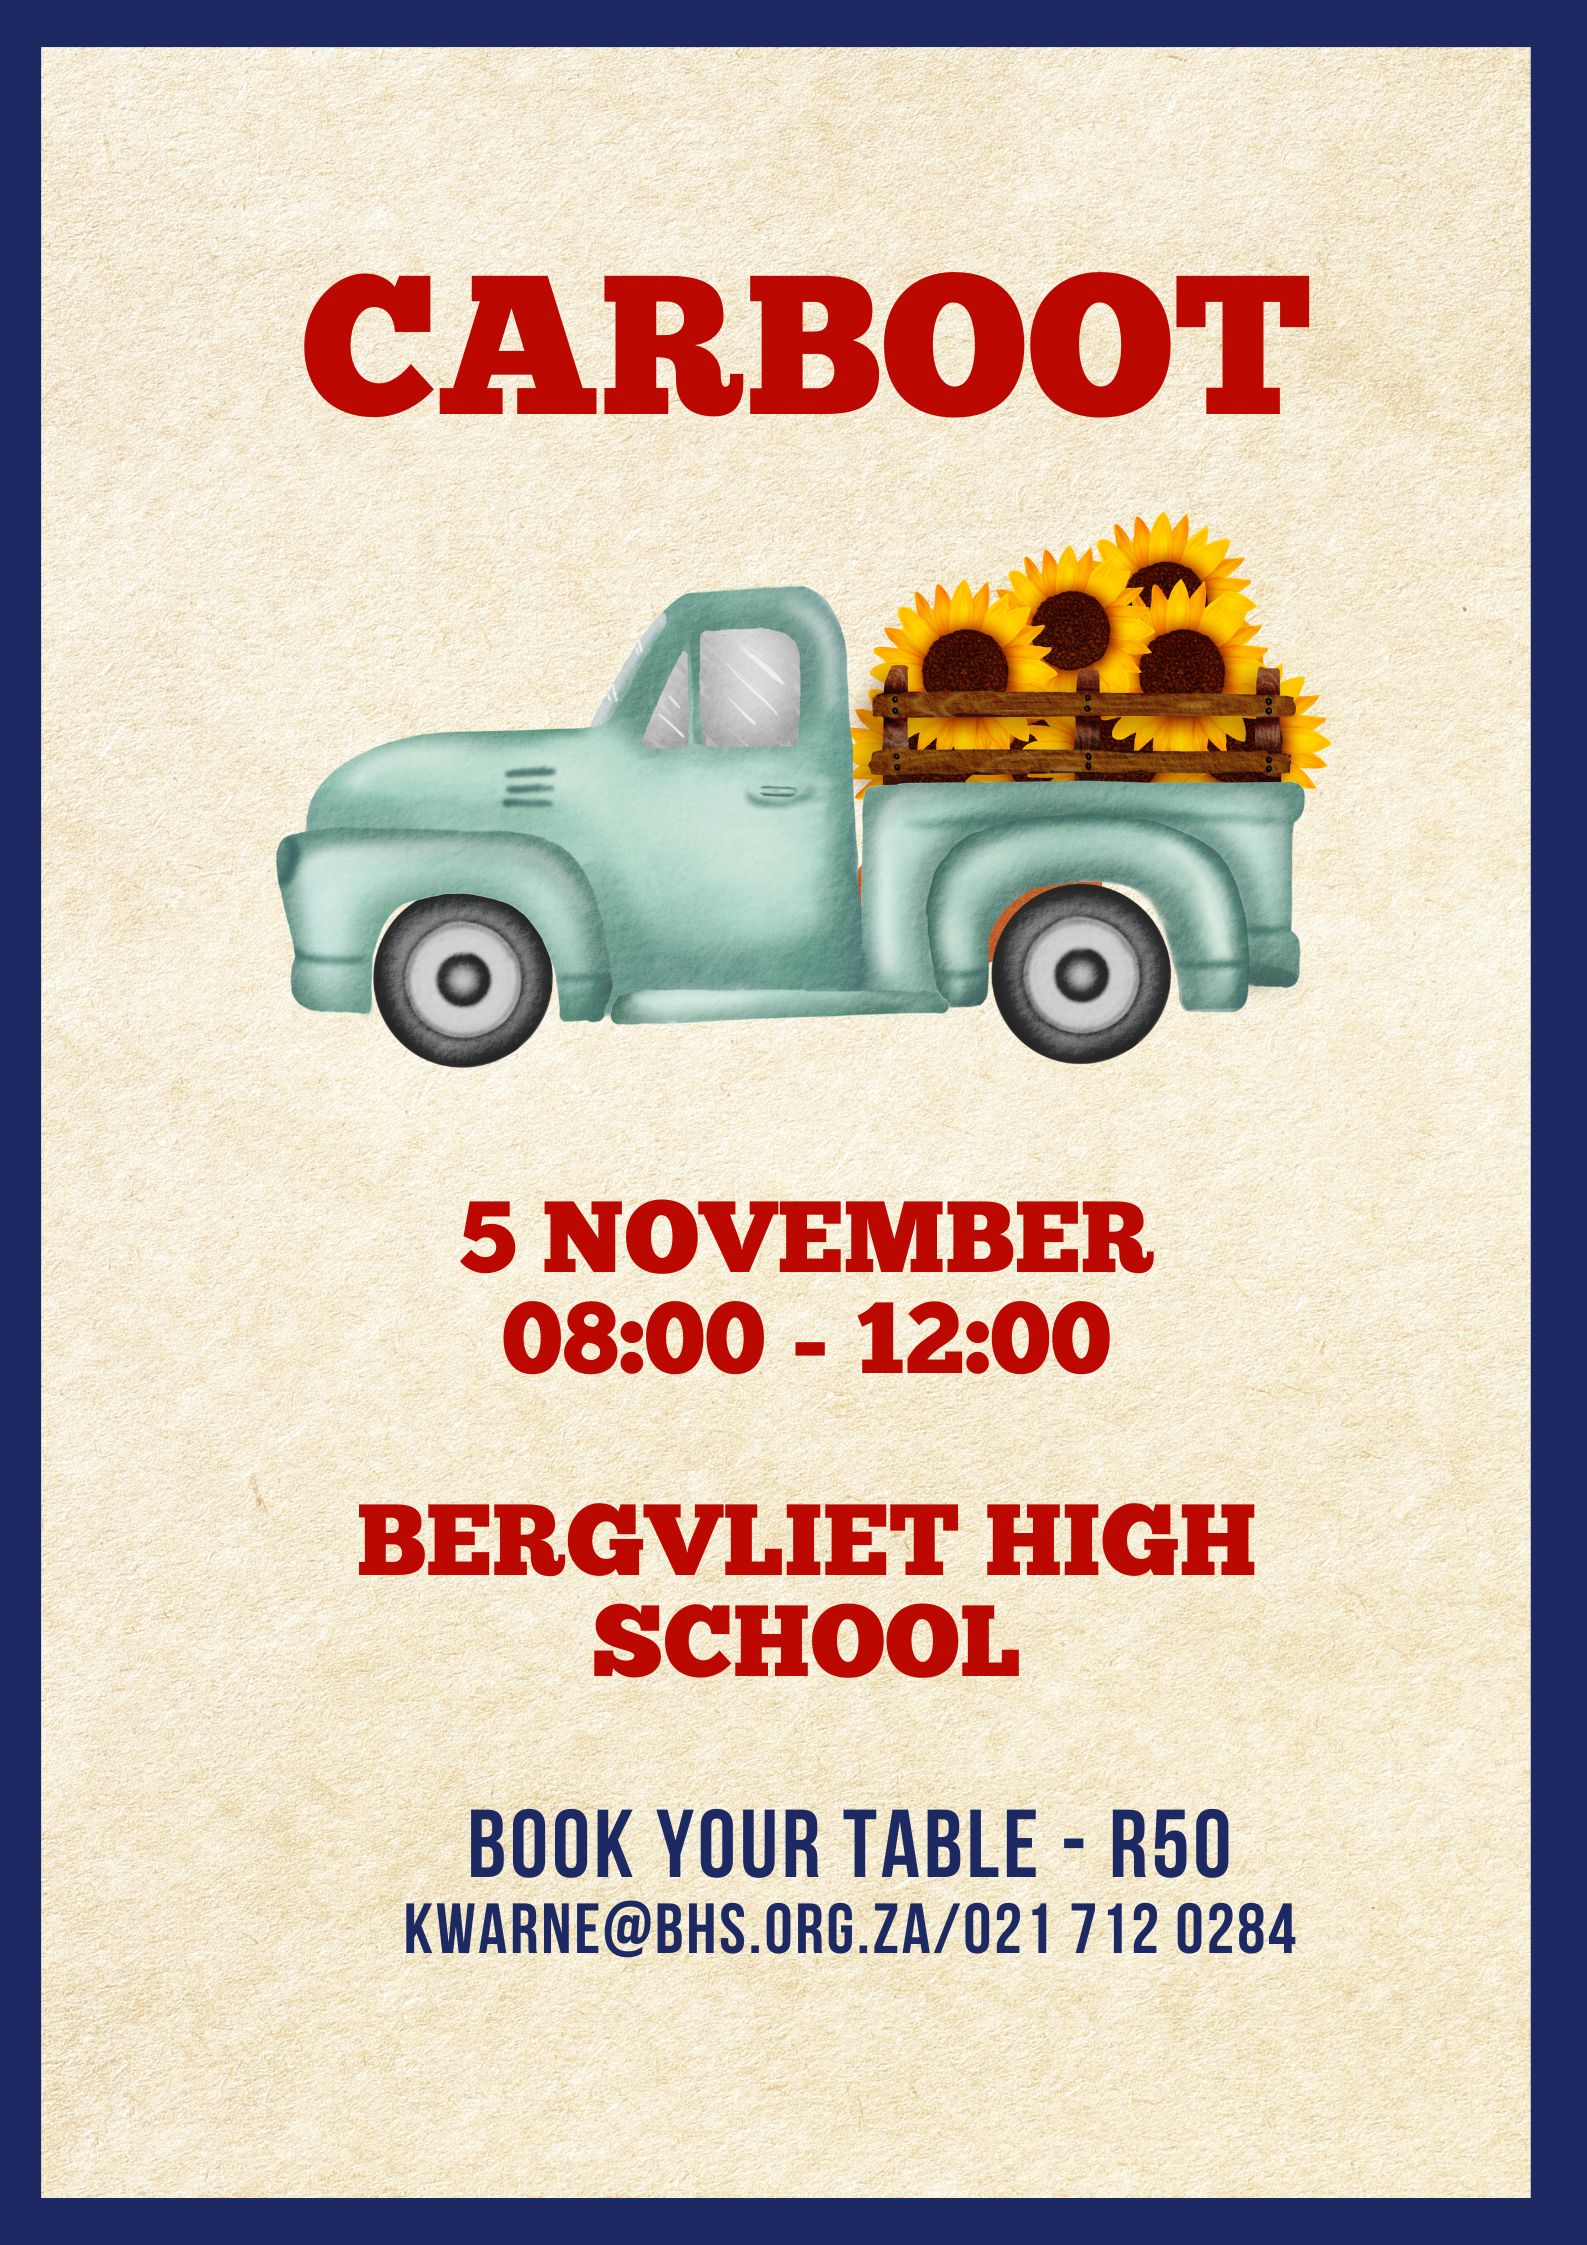 CARBOOT